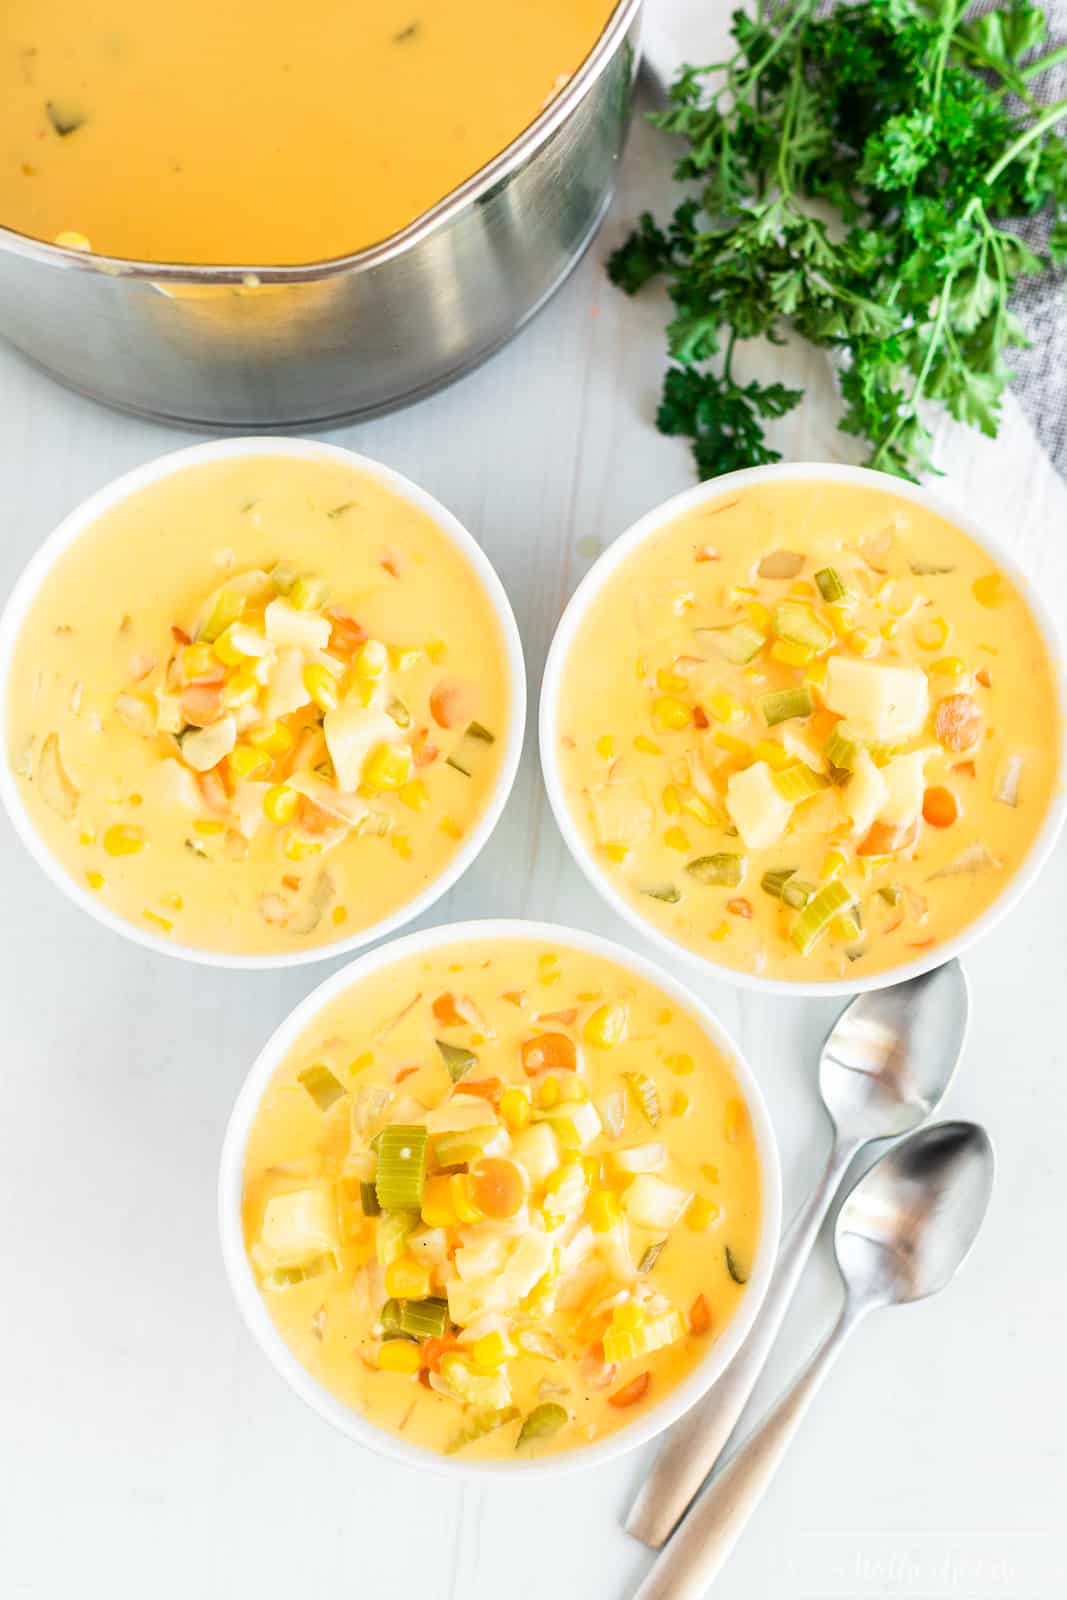 Share this corn chowder soup with your family and friends!